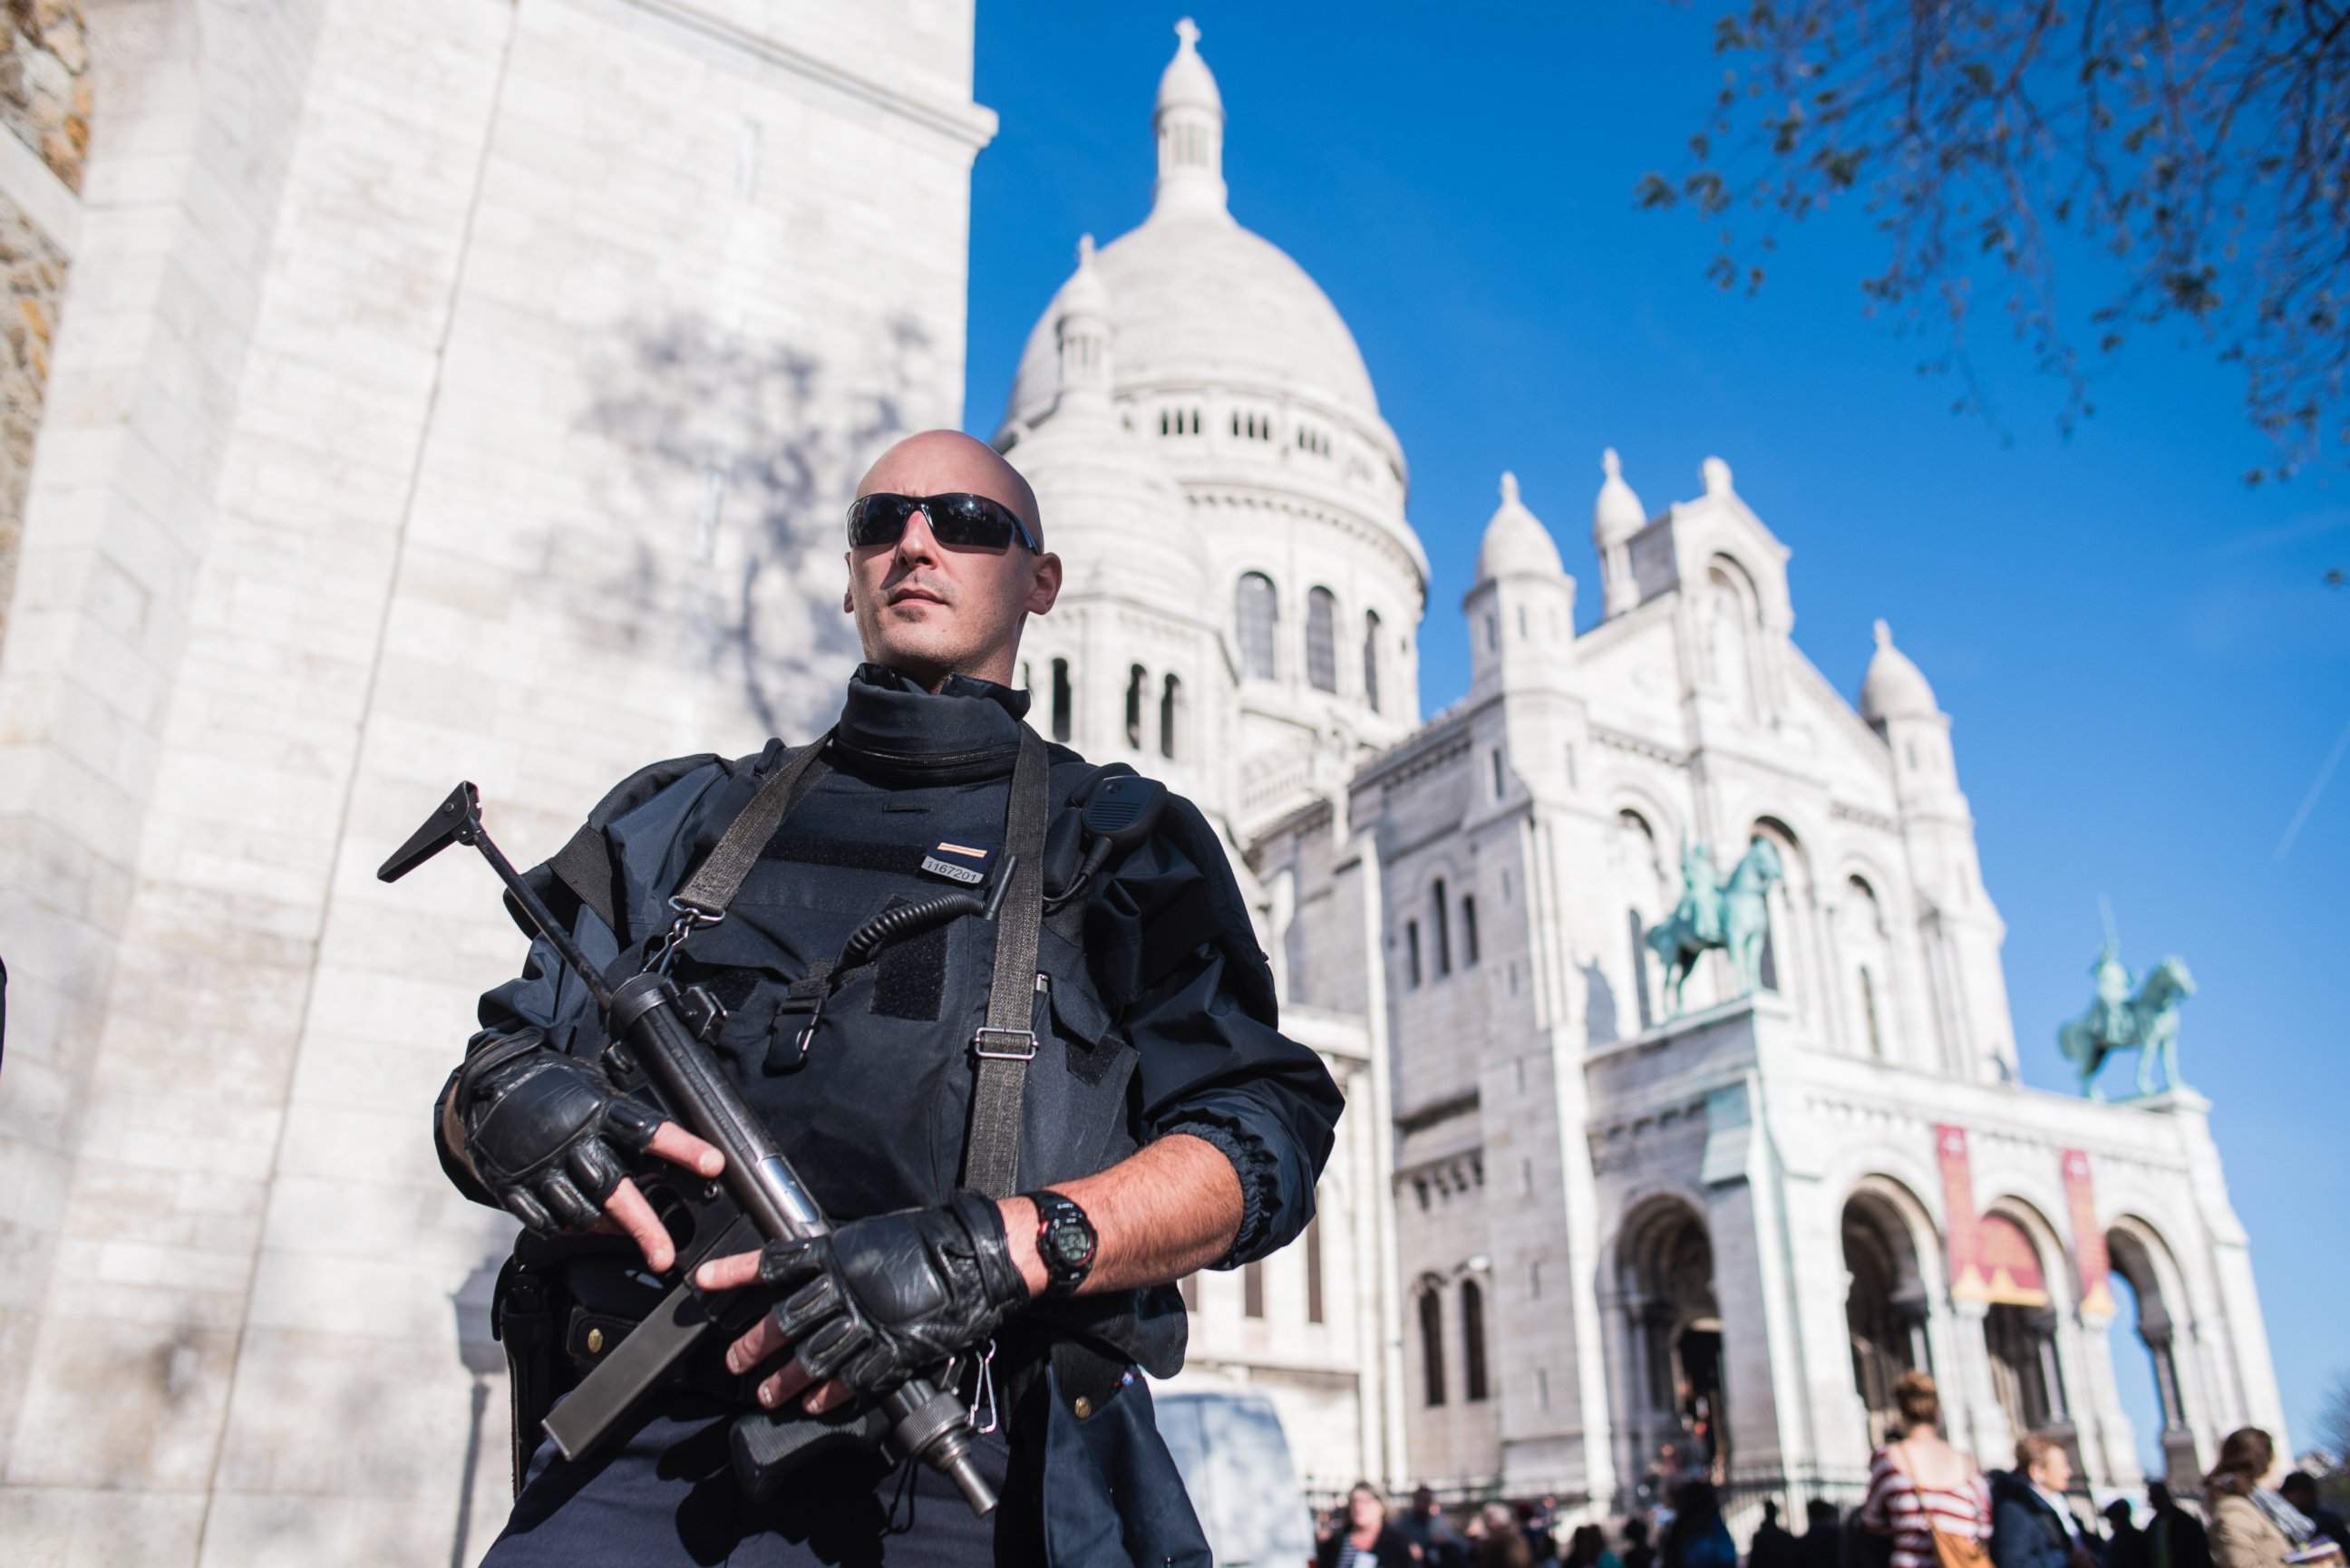 PHOTO: A French police officer patrols the Sacre Coeur basilica in Paris on Nov. 15, 2015.